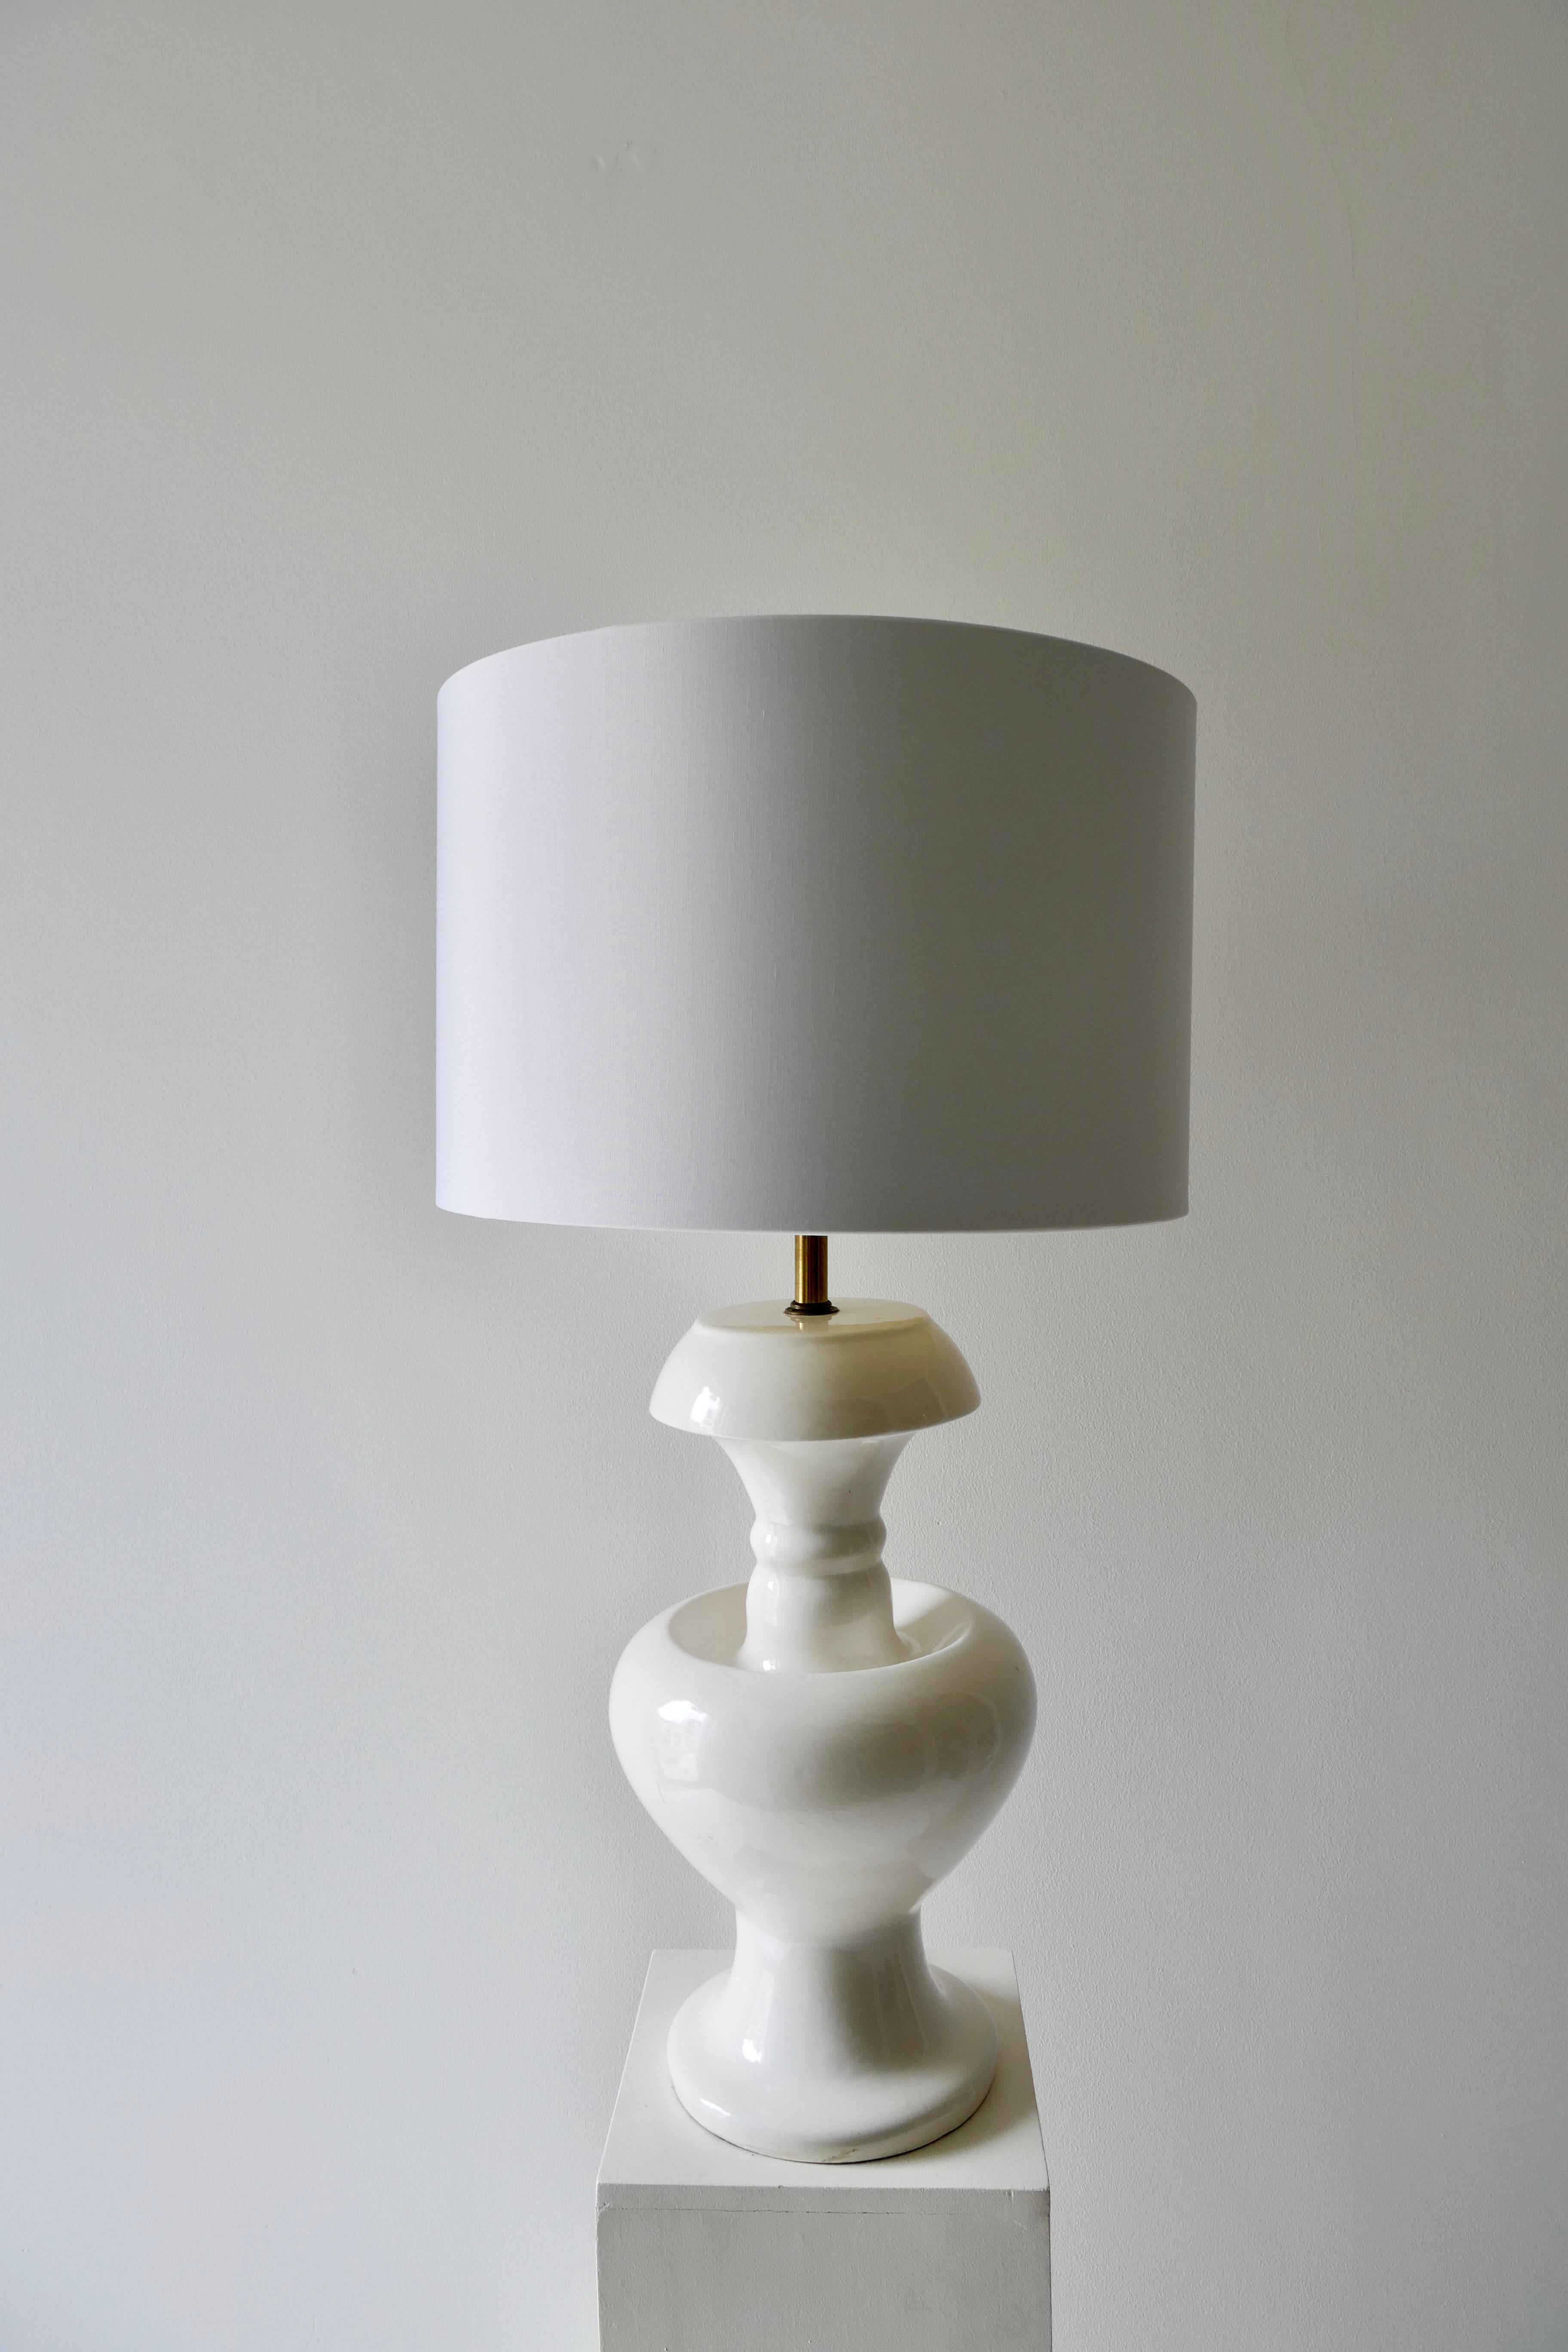 Sinuous shape, elegantly simple this table lamps is perfect in a living room or bedroom
White ceramic and new lampshade
Mid-Century Modern American.